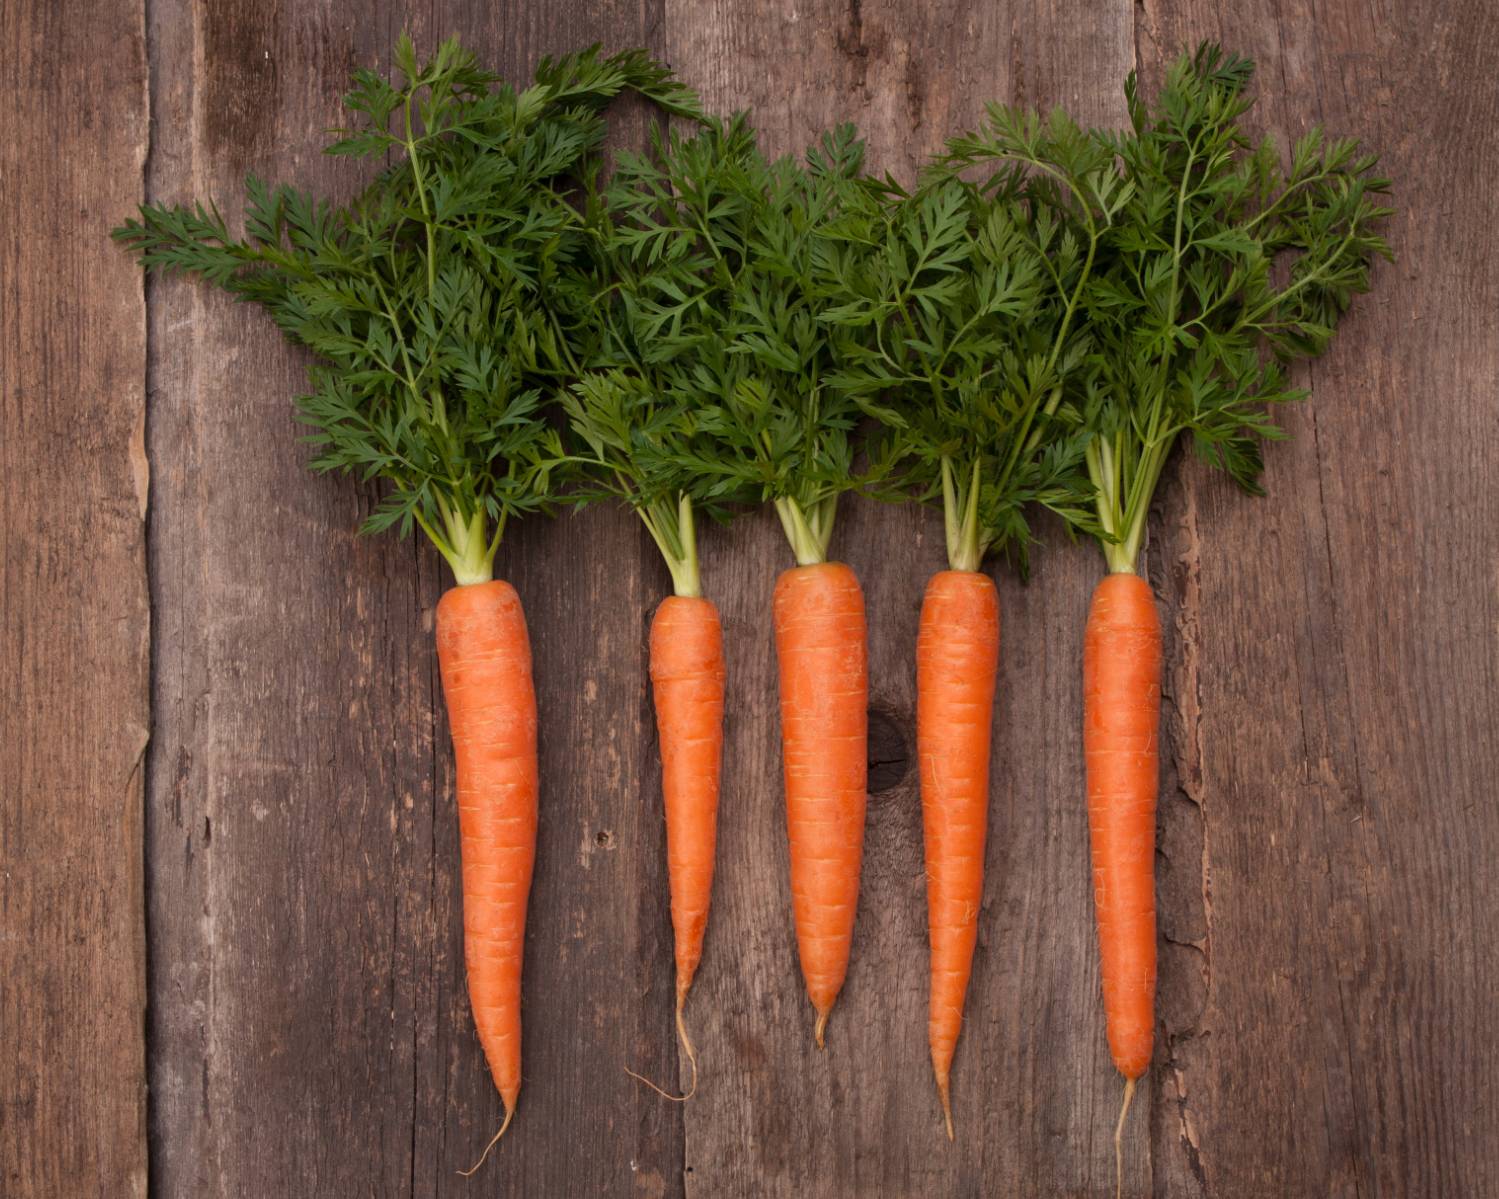 A photograph of carrots on a wooden background.